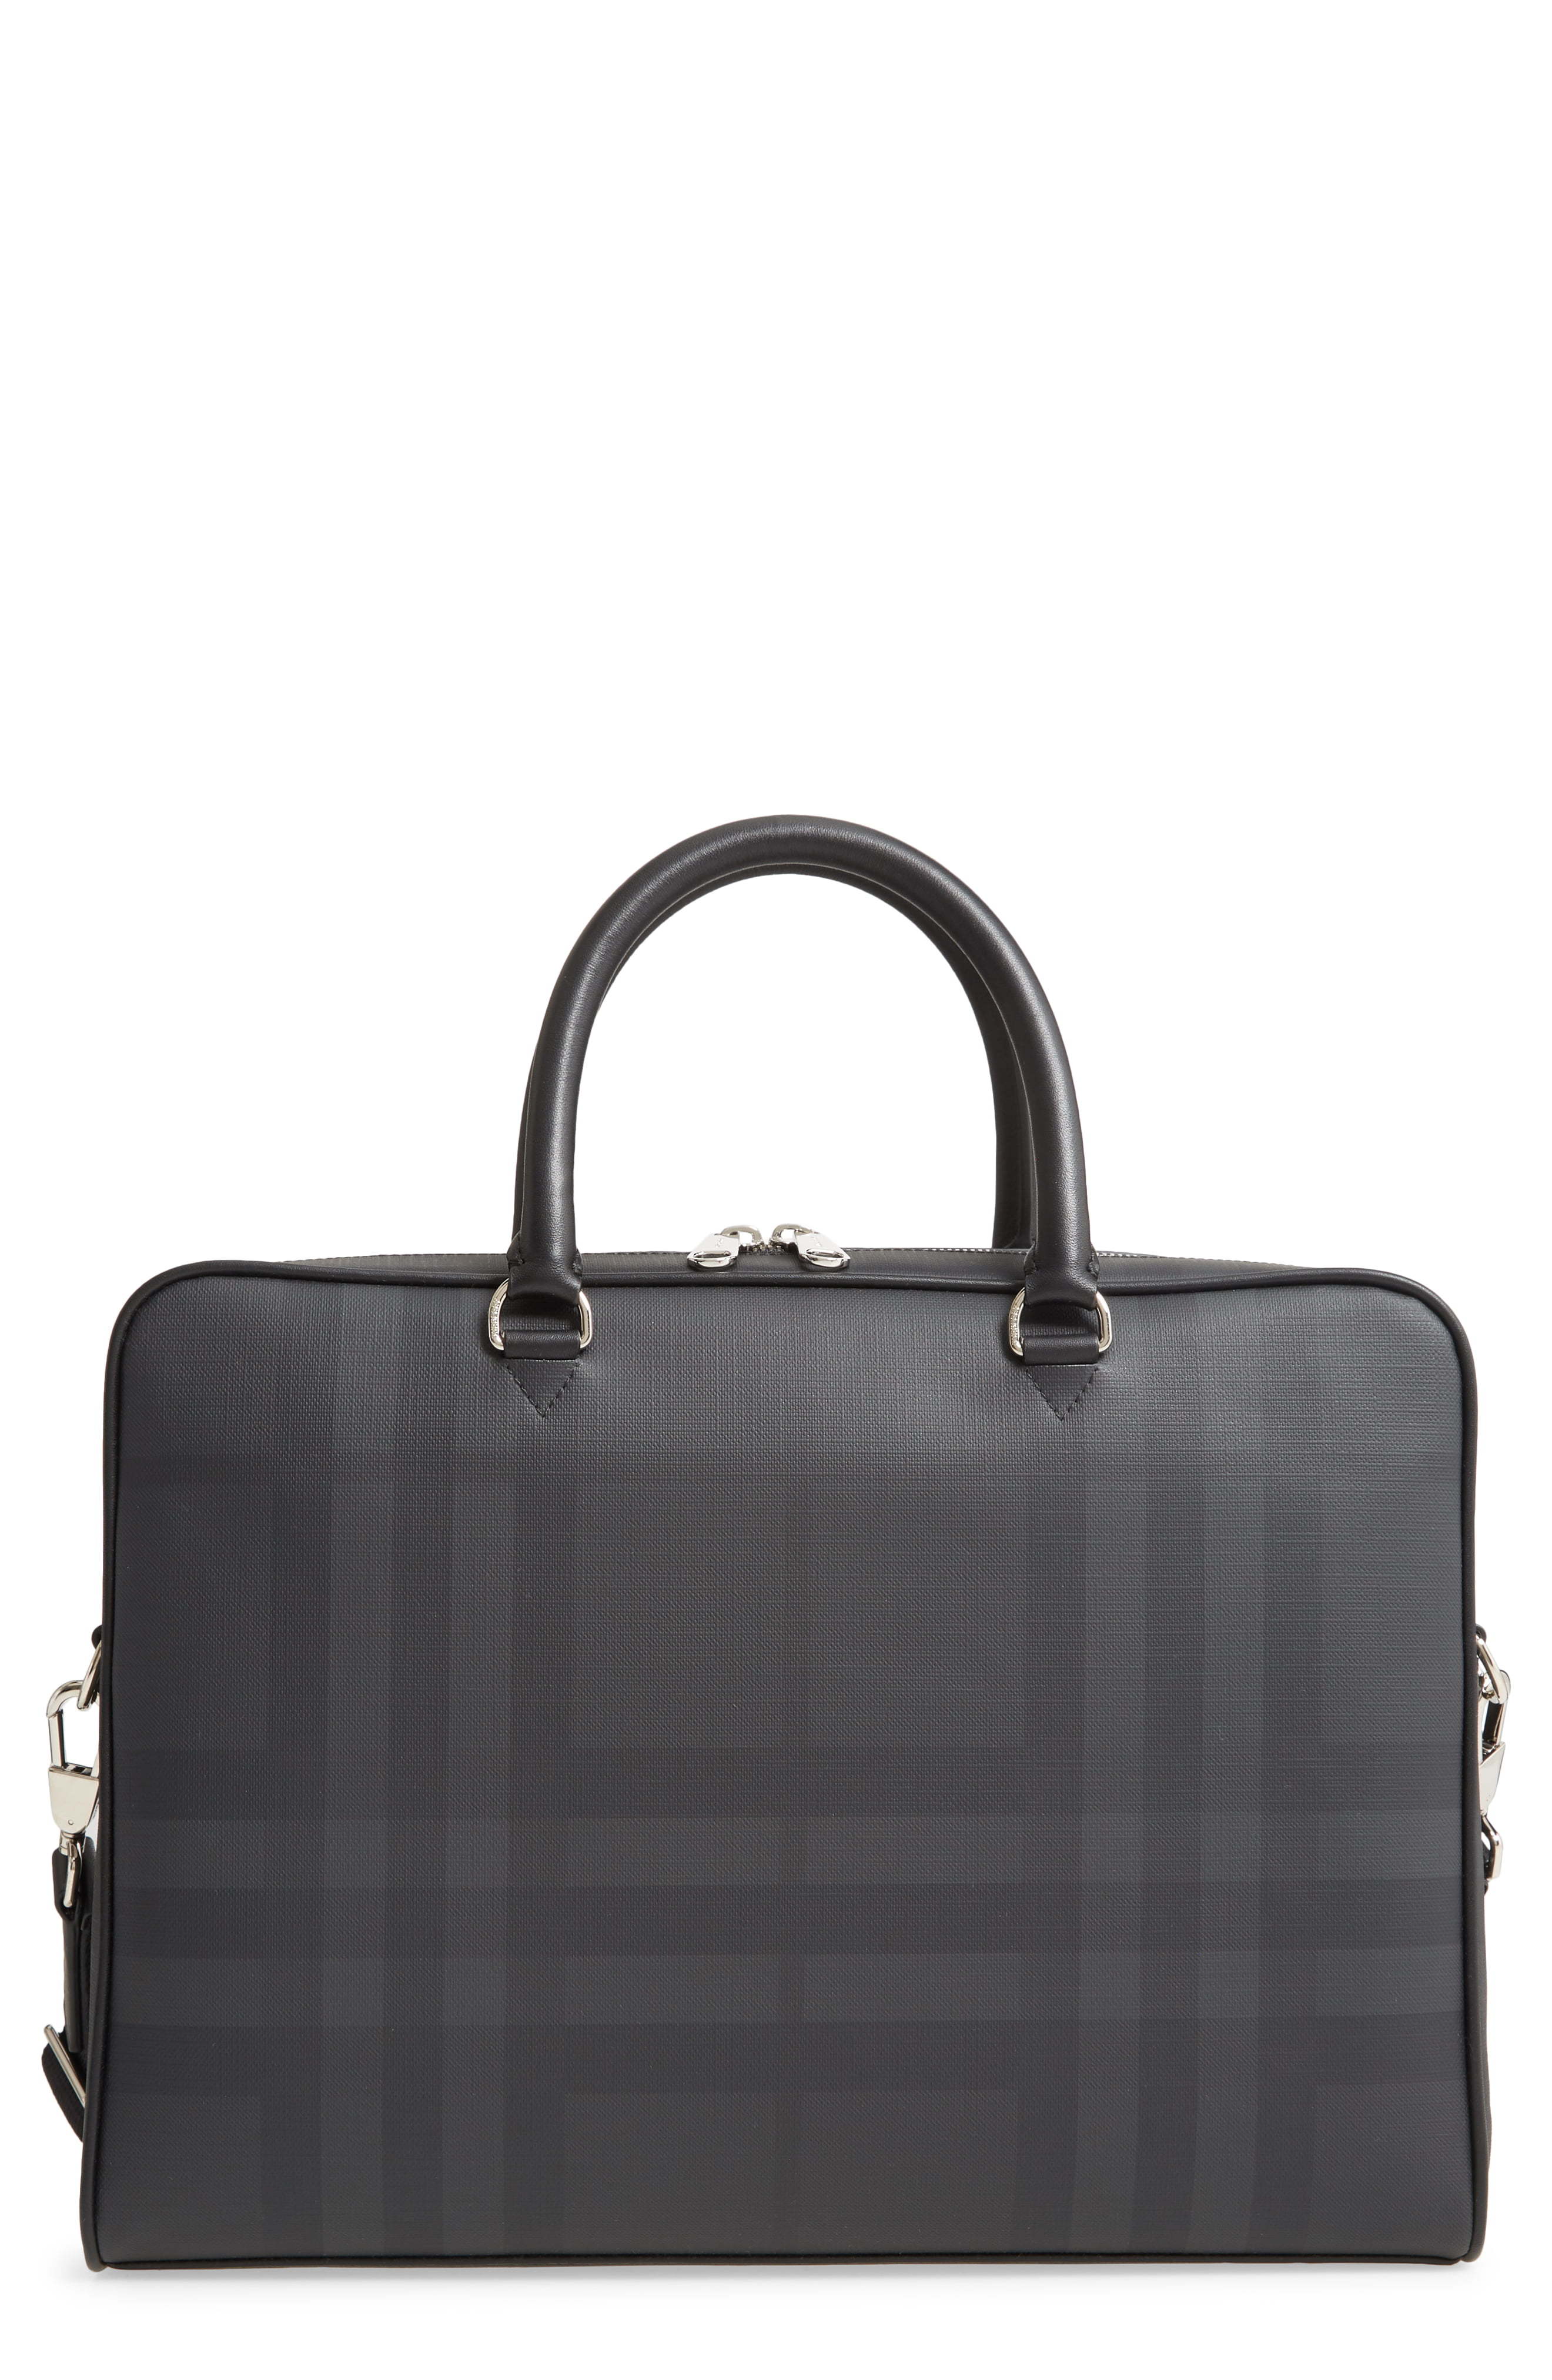 Burberry Ainsworth London Check Canvas Leather Briefcase, $1,550 ...